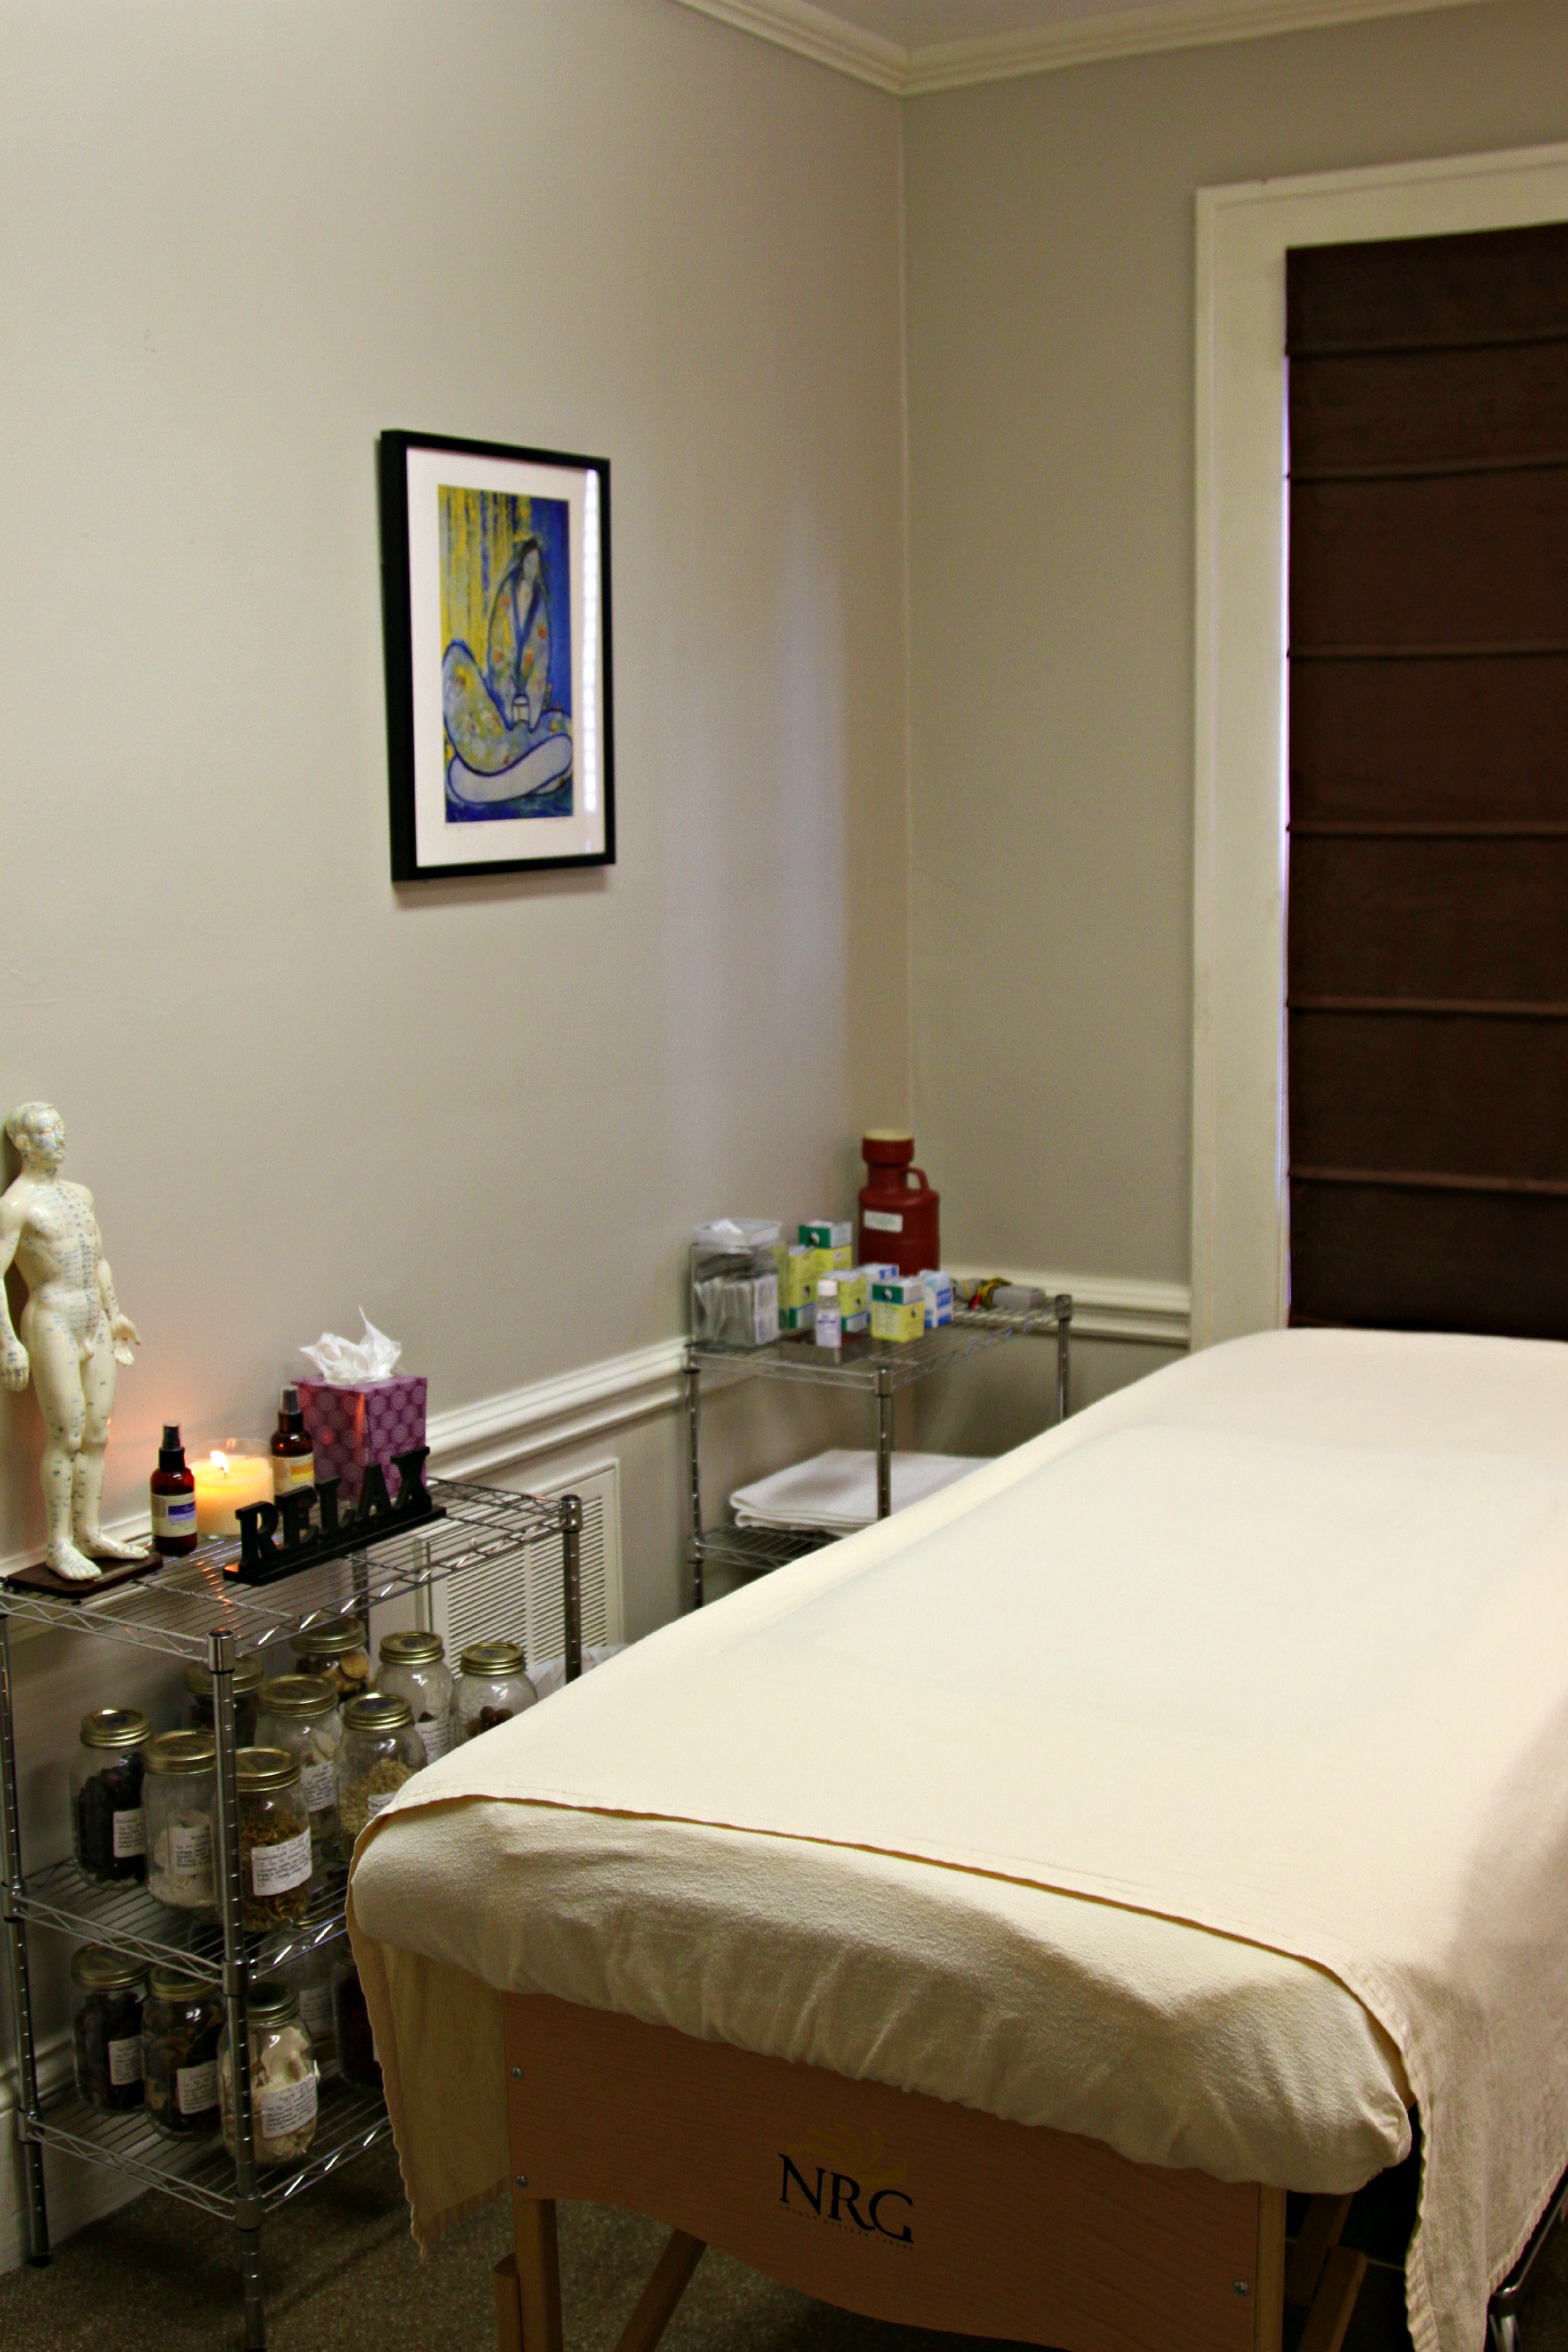 The Healing Hands Acupuncture and Herbal Clinic